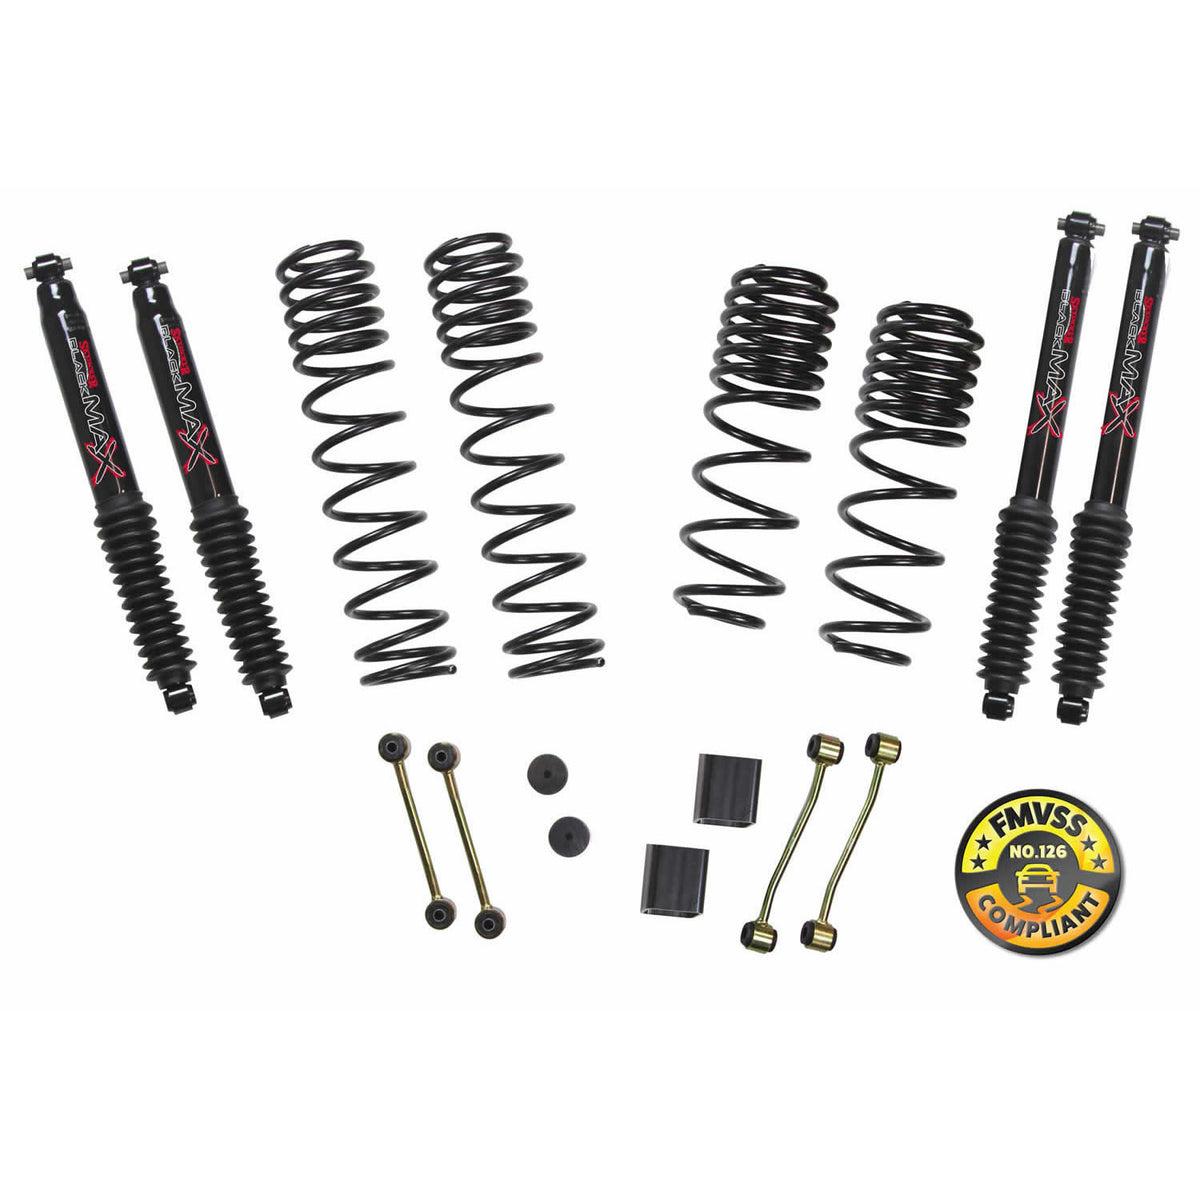 Suspension Lift Kit w/Shock 2-2.5 Inch Lift 18-19 Jeep Wrangler W/Frt. And Rear Dual Rate/Long Travel Series Coil Springs Extended Sway Bar End Links Grade 8 Mounting Hdwr Black MAX Shocks Skyjacker